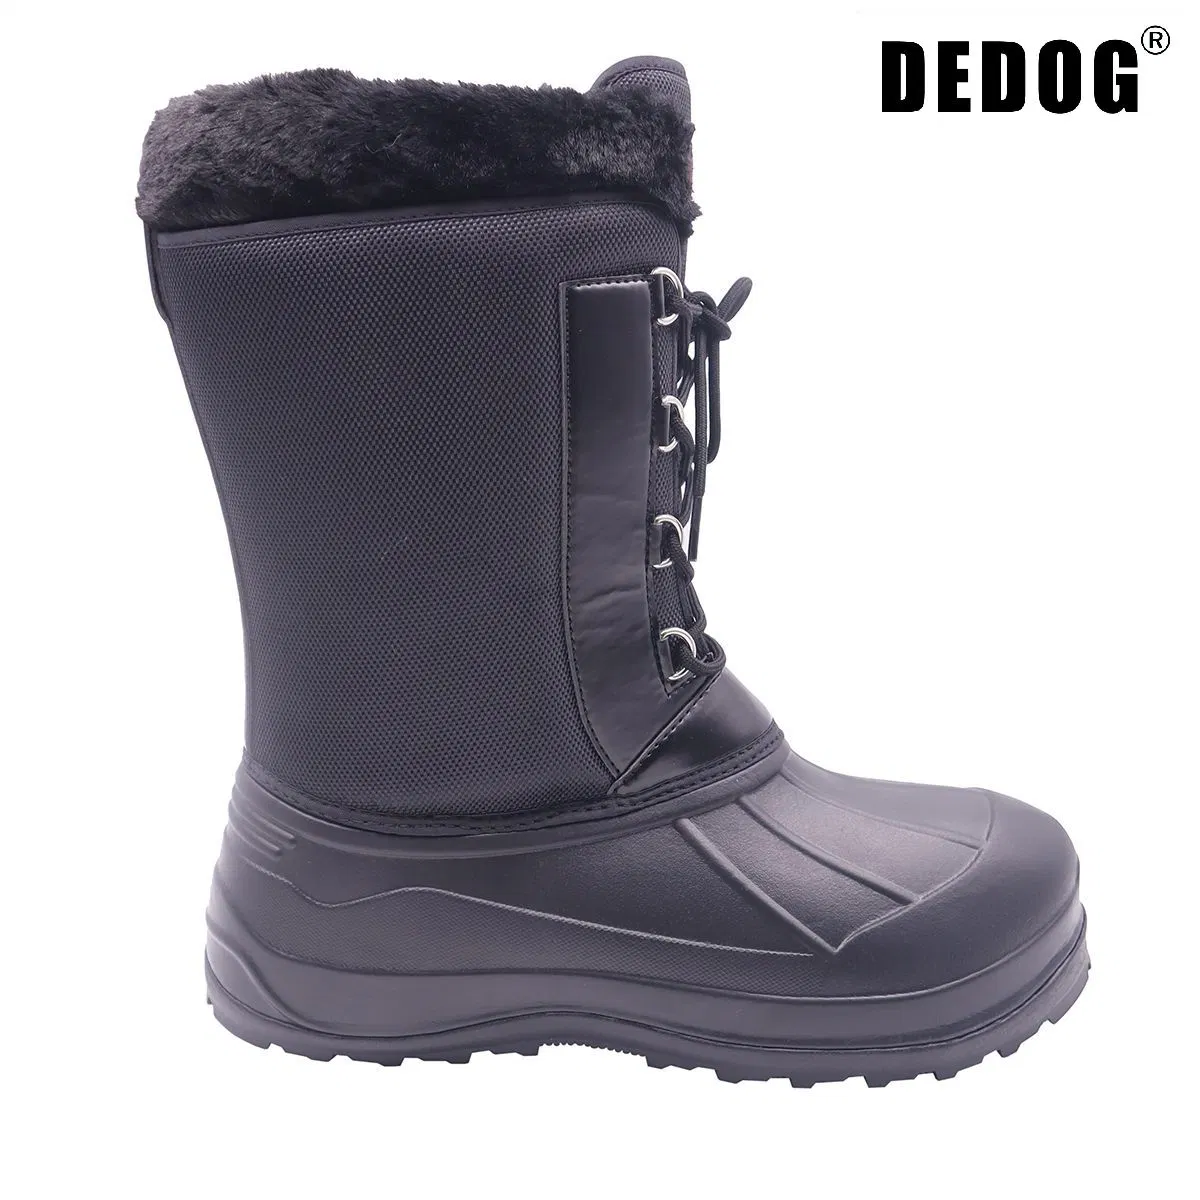 Slip on Snow Boots for Men Waterproof Shoes Nylon Insulated Winter Boots